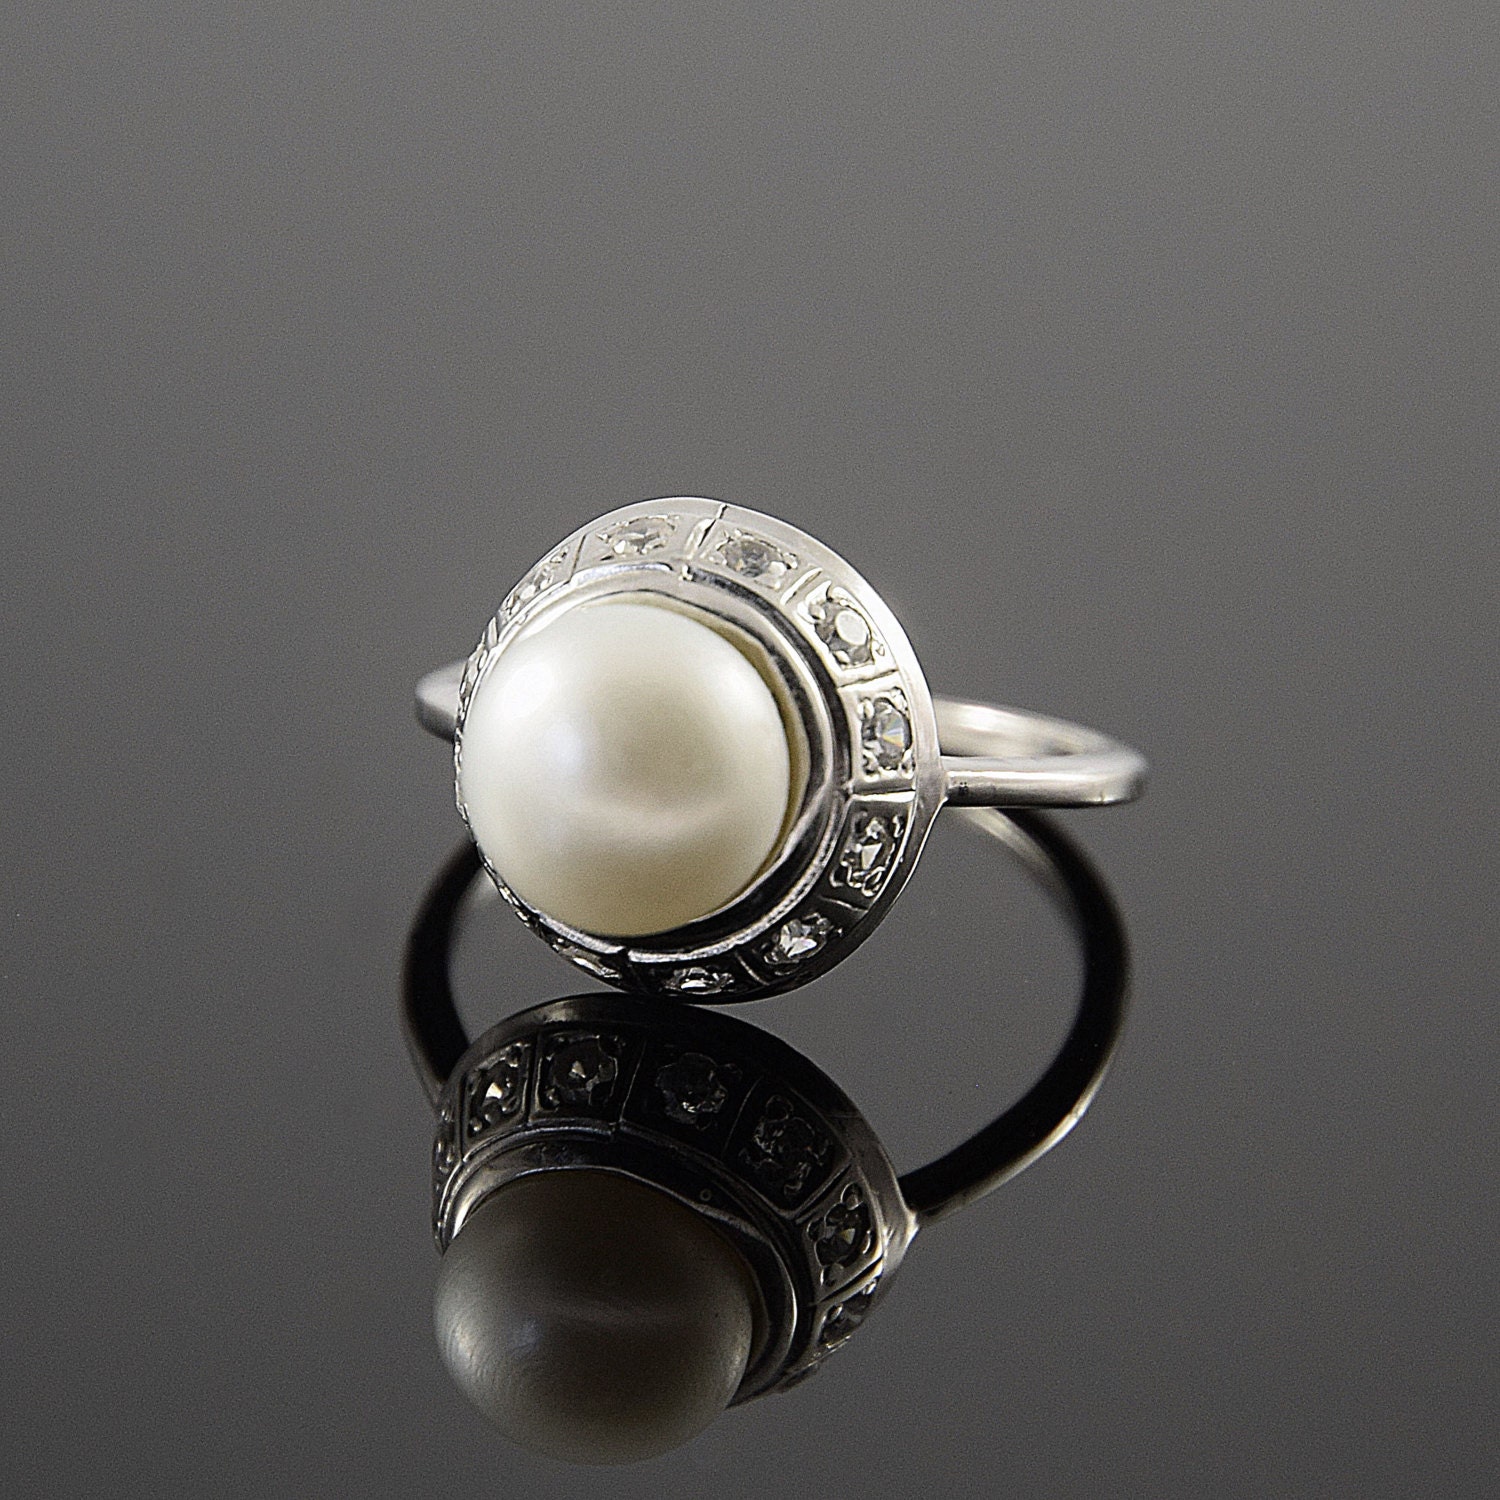 Pearl ring White pearl ring Art deco ring Victorian ring